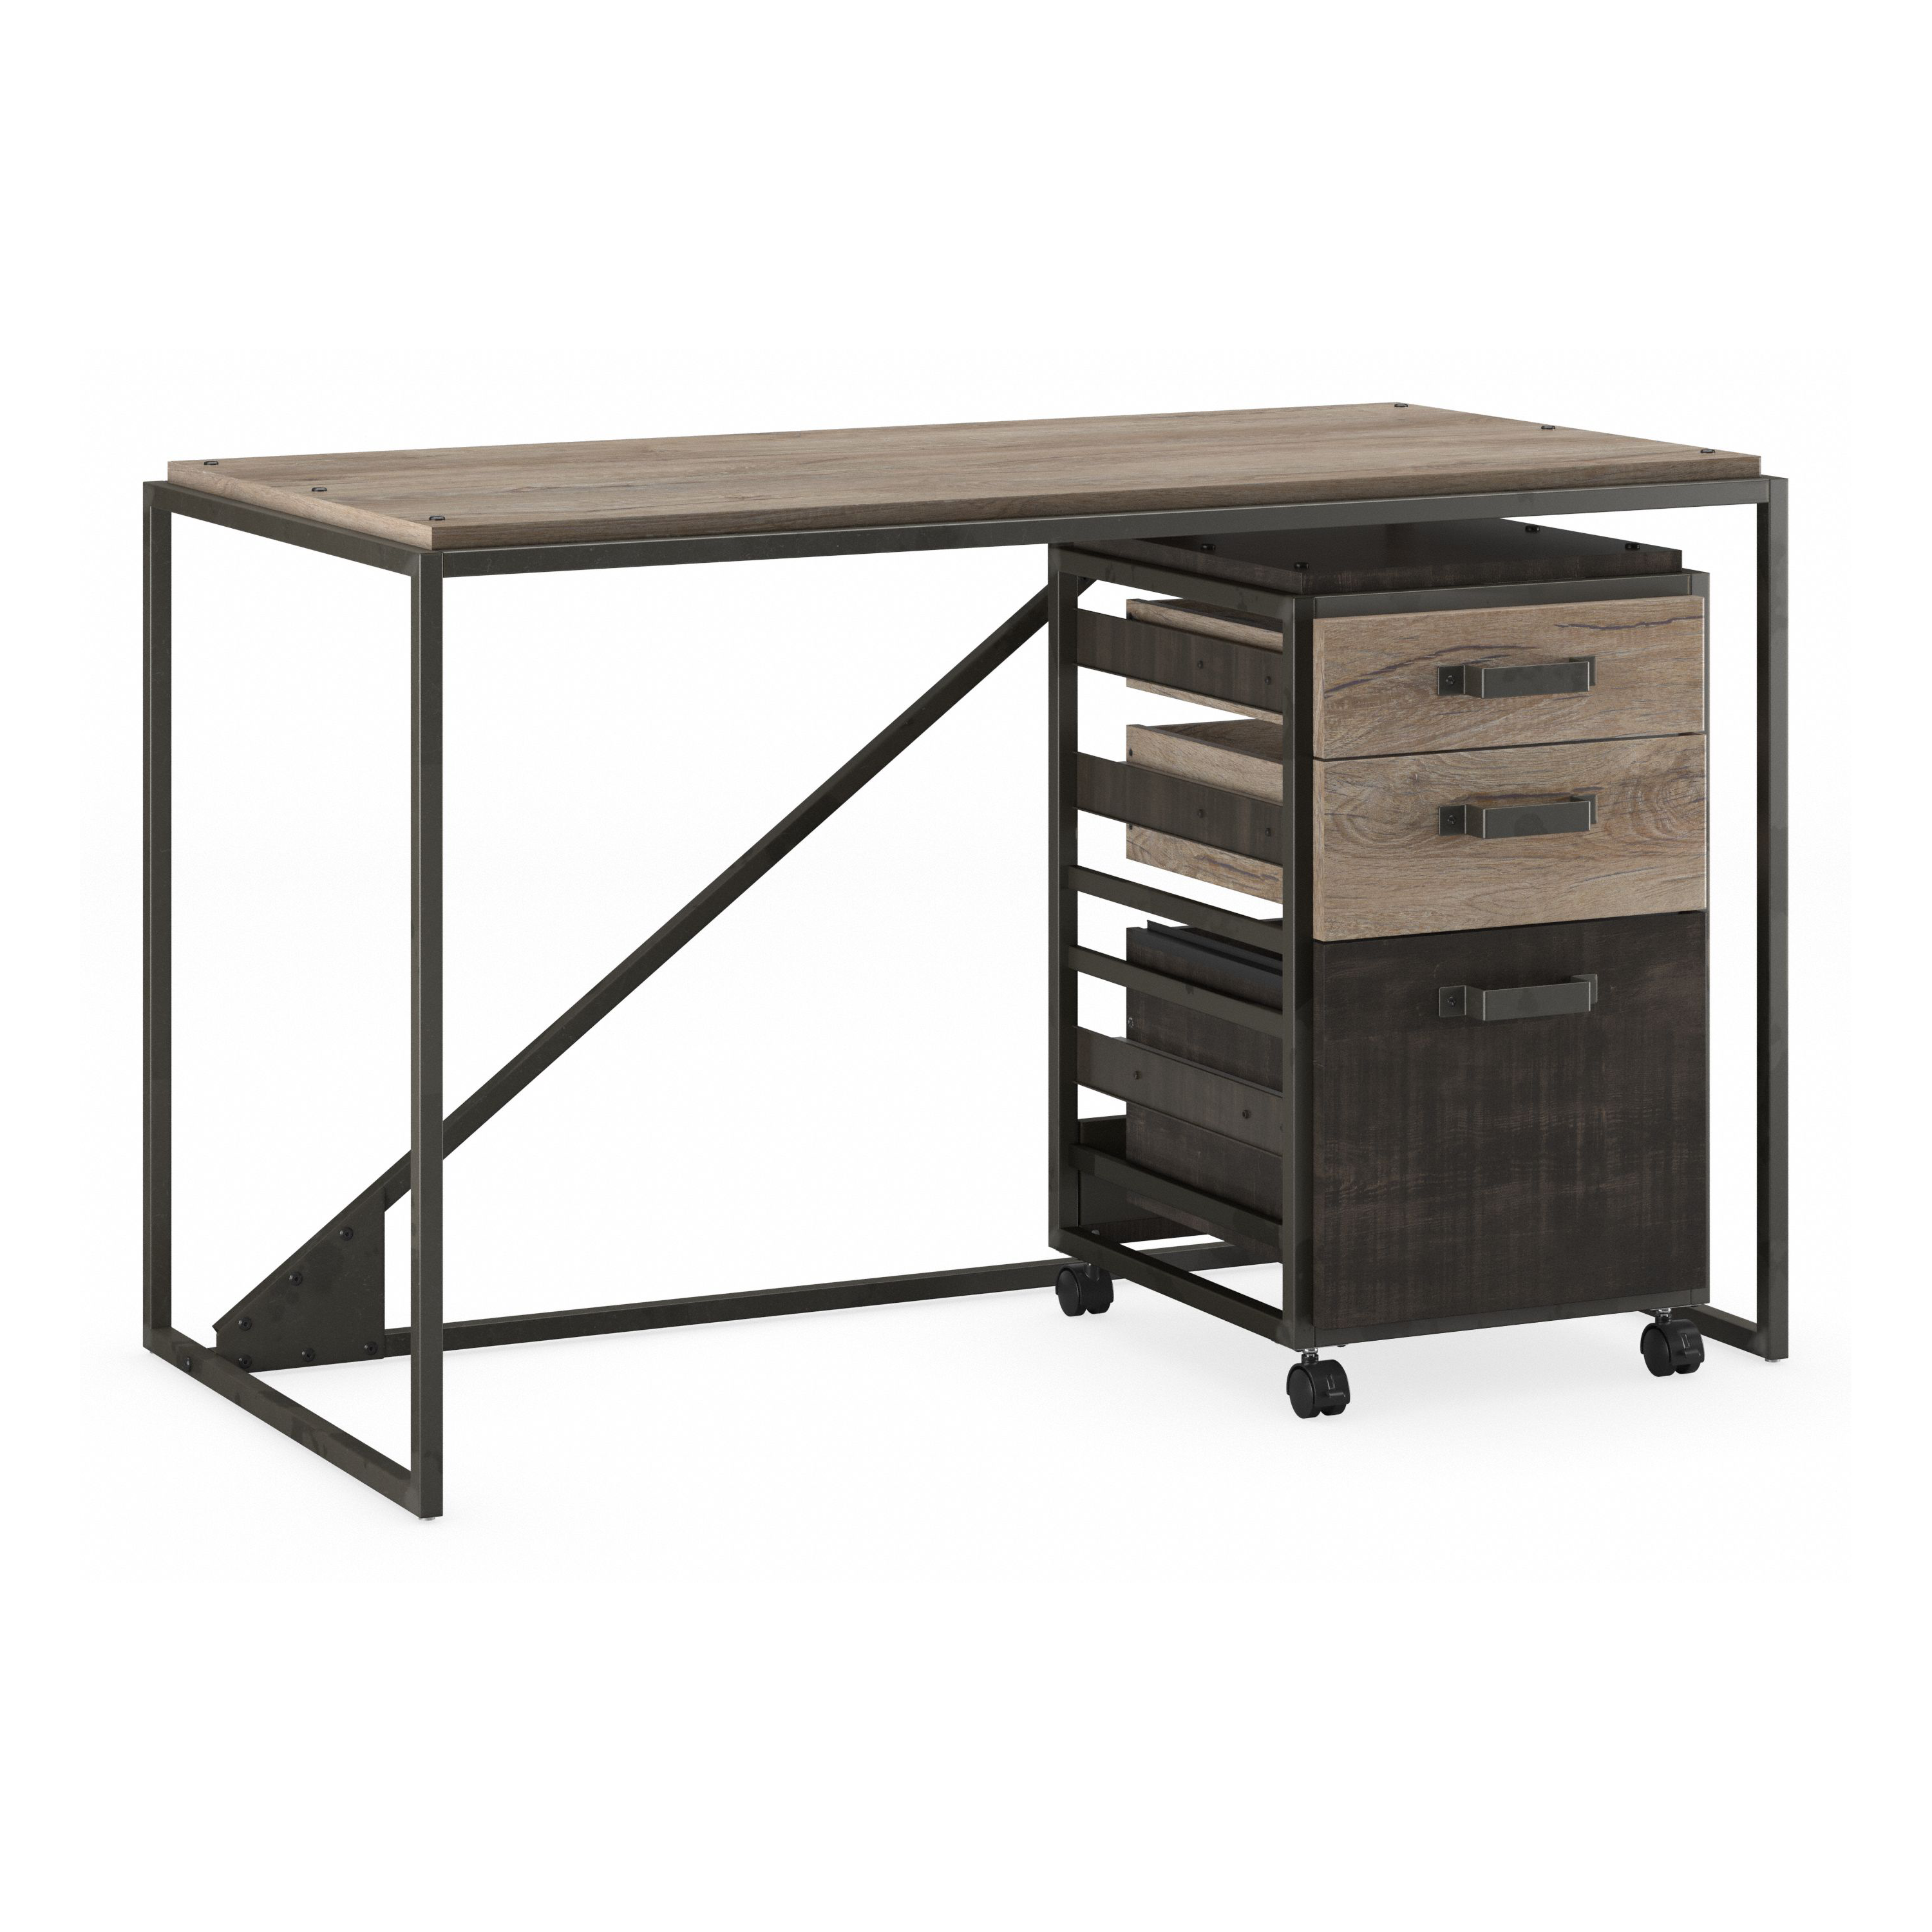 Shop Bush Furniture Refinery 50W Industrial Desk with 3 Drawer Mobile File Cabinet 02 RFY006RG #color_rustic gray/charred wood